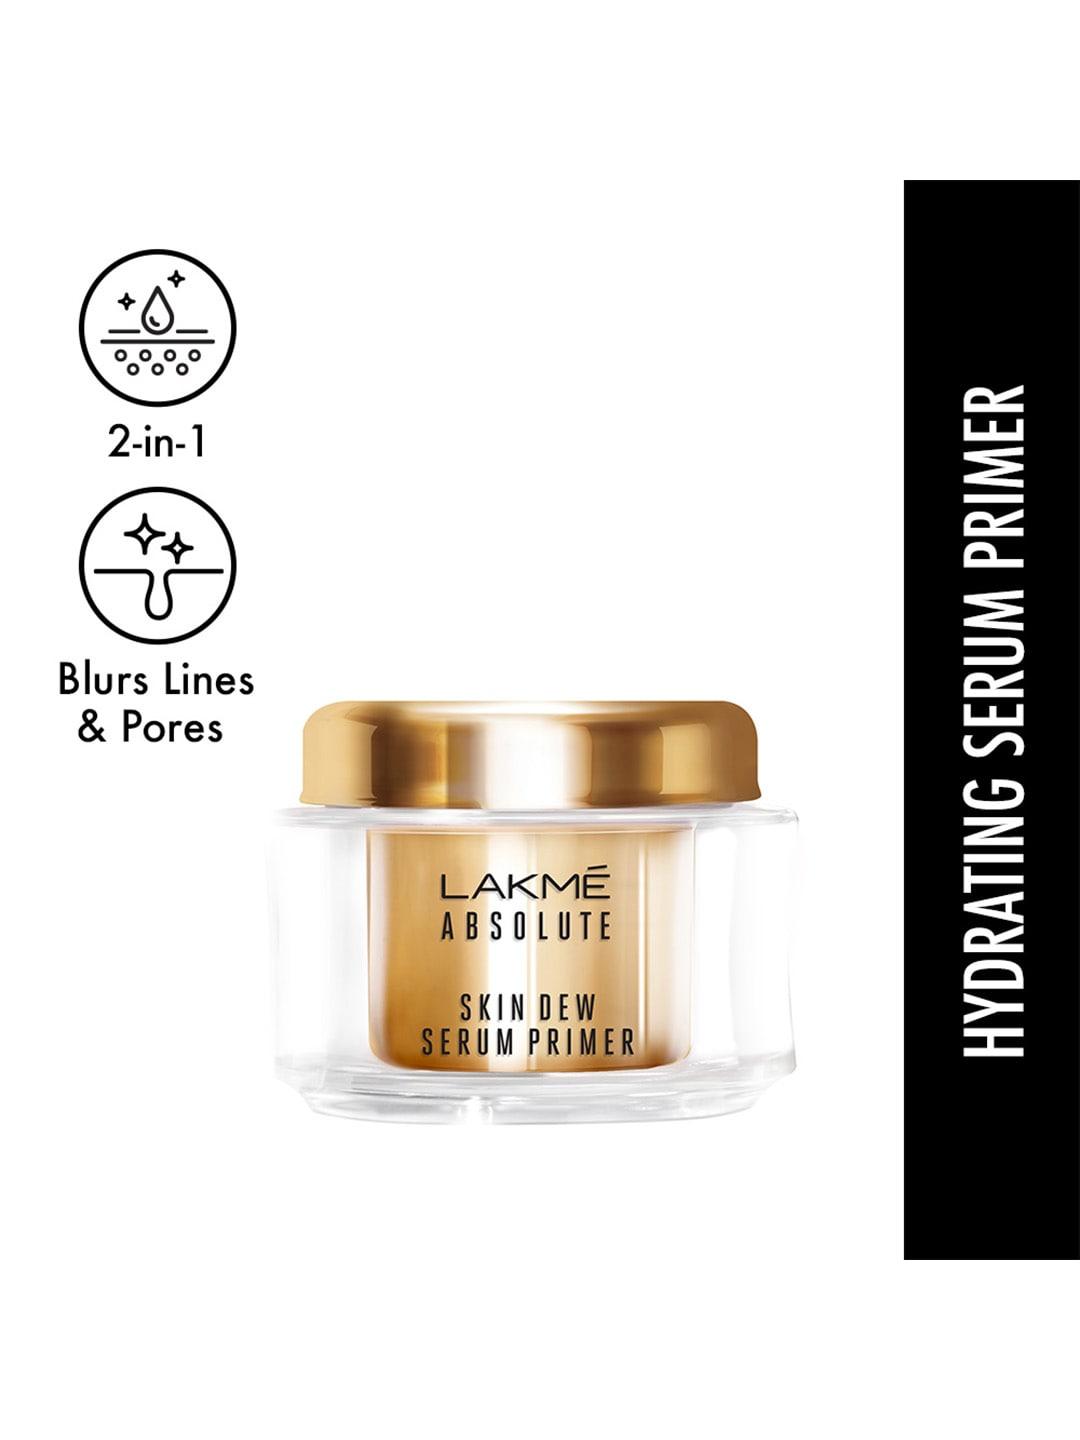 Lakme Absolute Skin Dew Hydrating Serum Primer for Face - 28 g